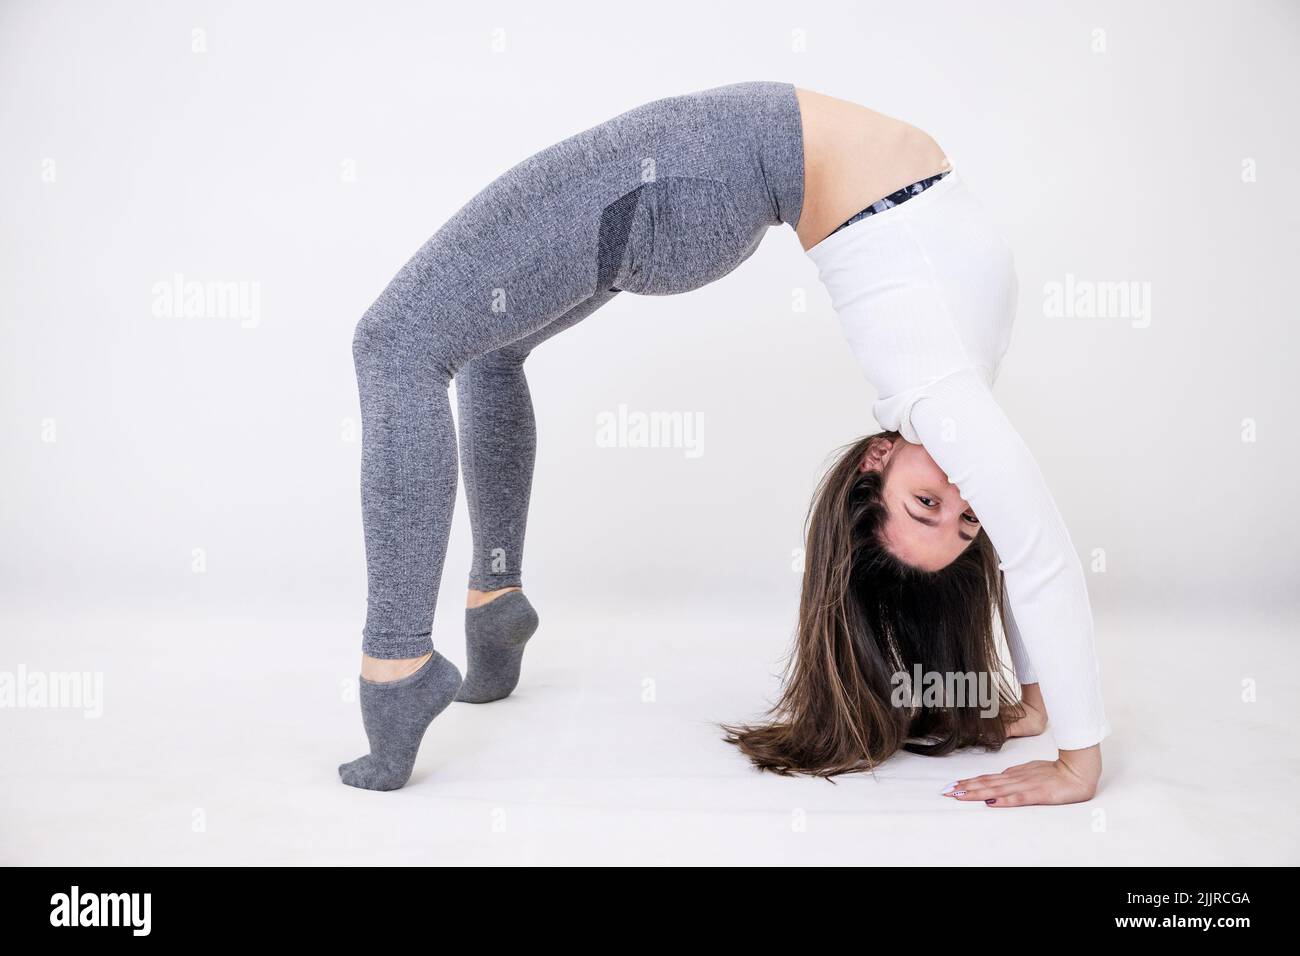 A female yoga teacher doing performing acrobatic movements while exercising Stock Photo